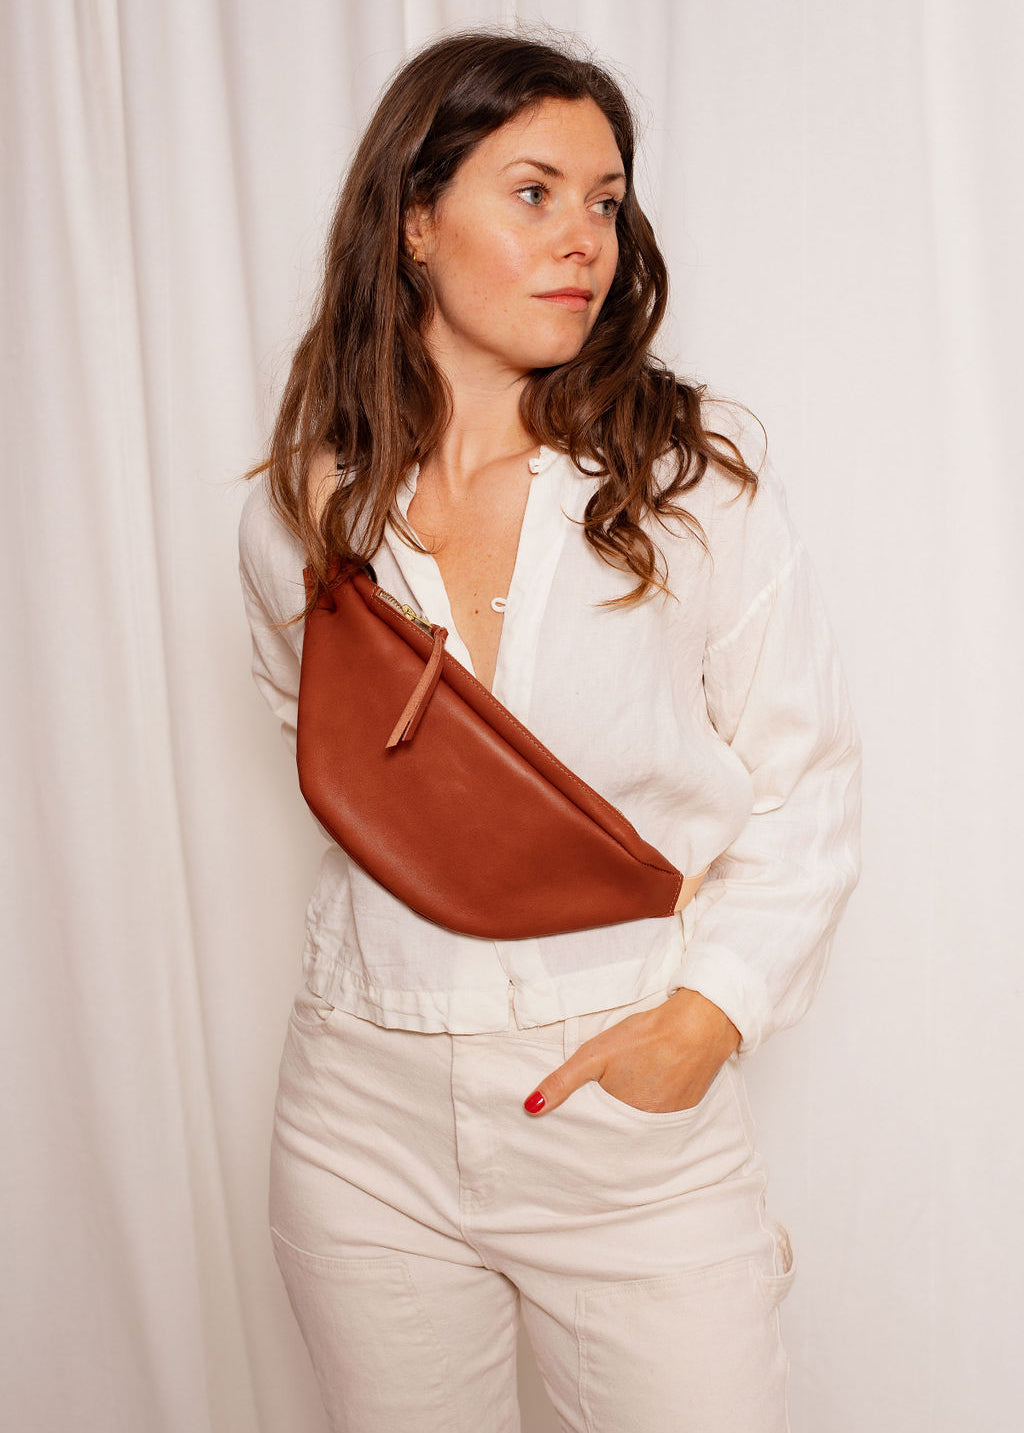 LAUREL SLING BAG | COGNAC Leather Bag - handcrafted by Market Canvas Leather in Tofino, BC, Canada